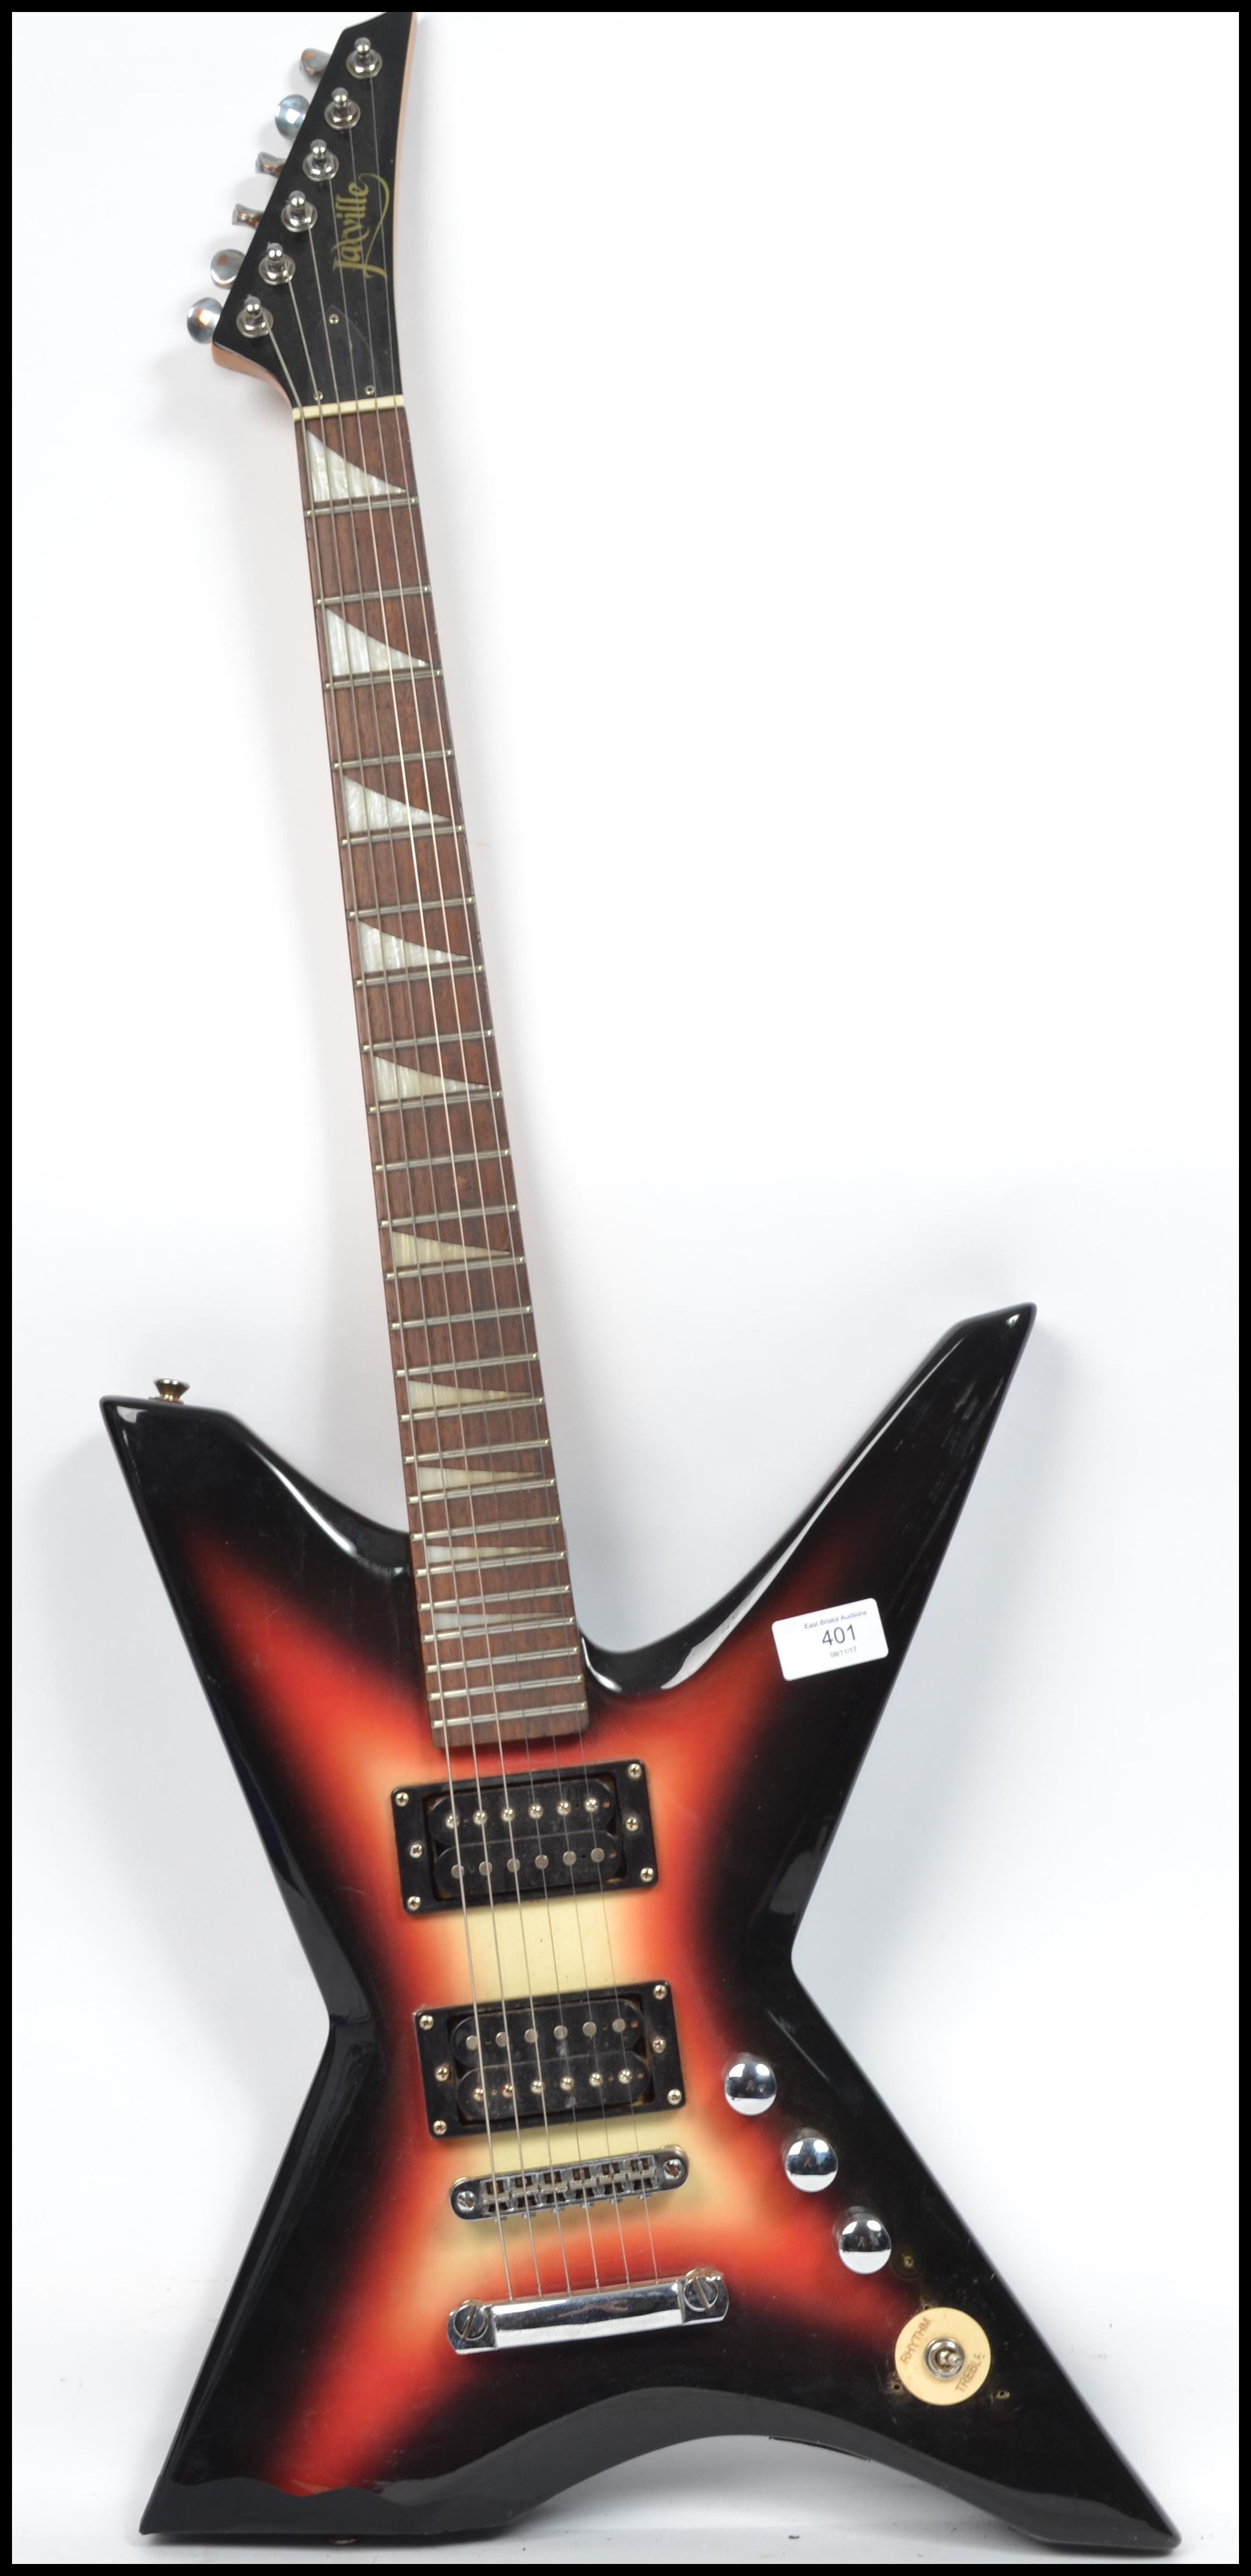 A vintage Jaxville six string electric guitar musical instrument having an X shaped body with burned